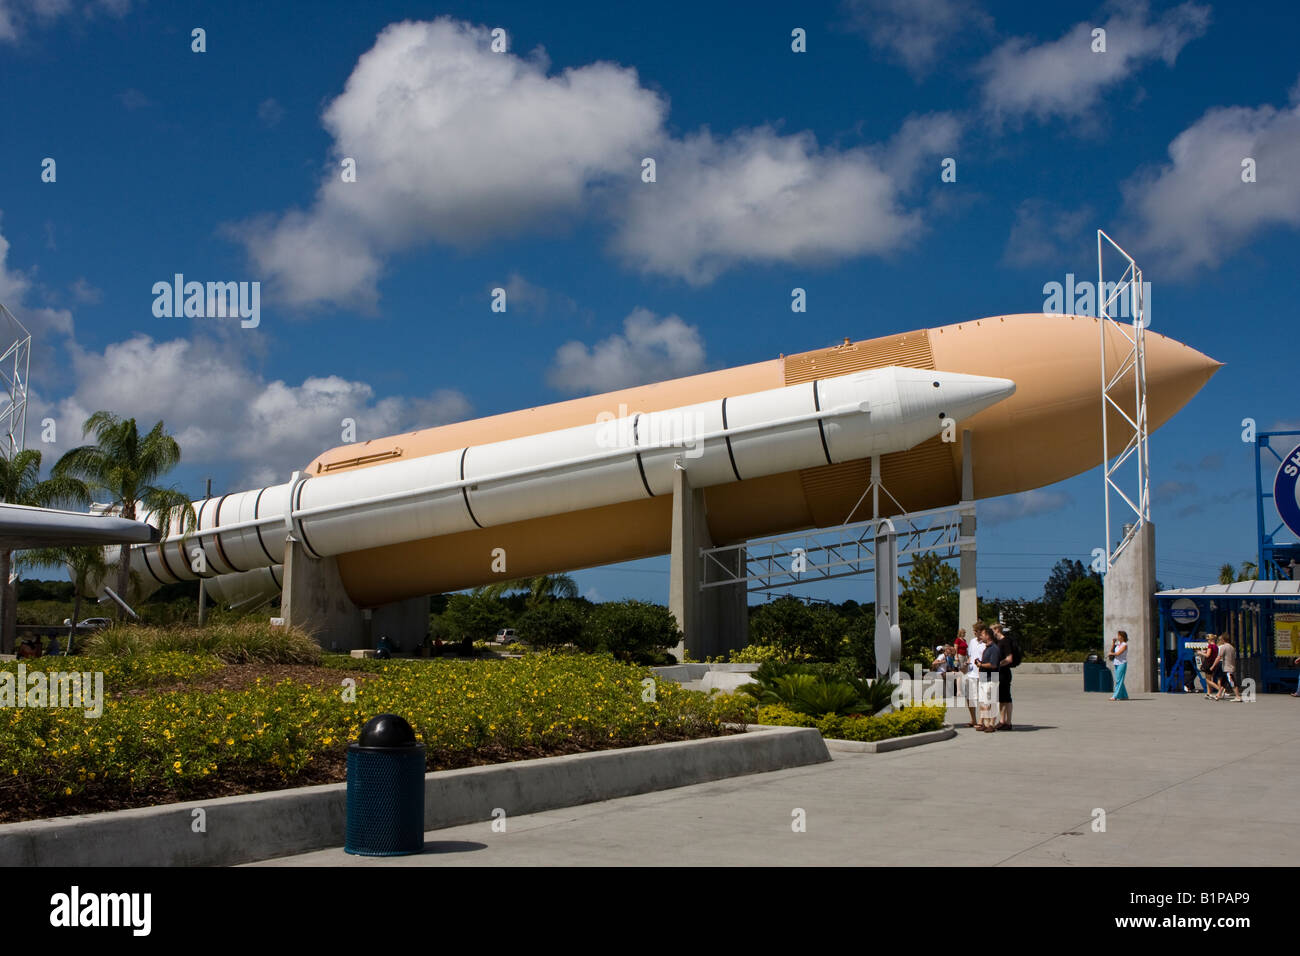 Externen Treibstofftank und Solid Rocket Booster Display an John F Kennedy Space Center in Cape Canaveral Florida Stockfoto